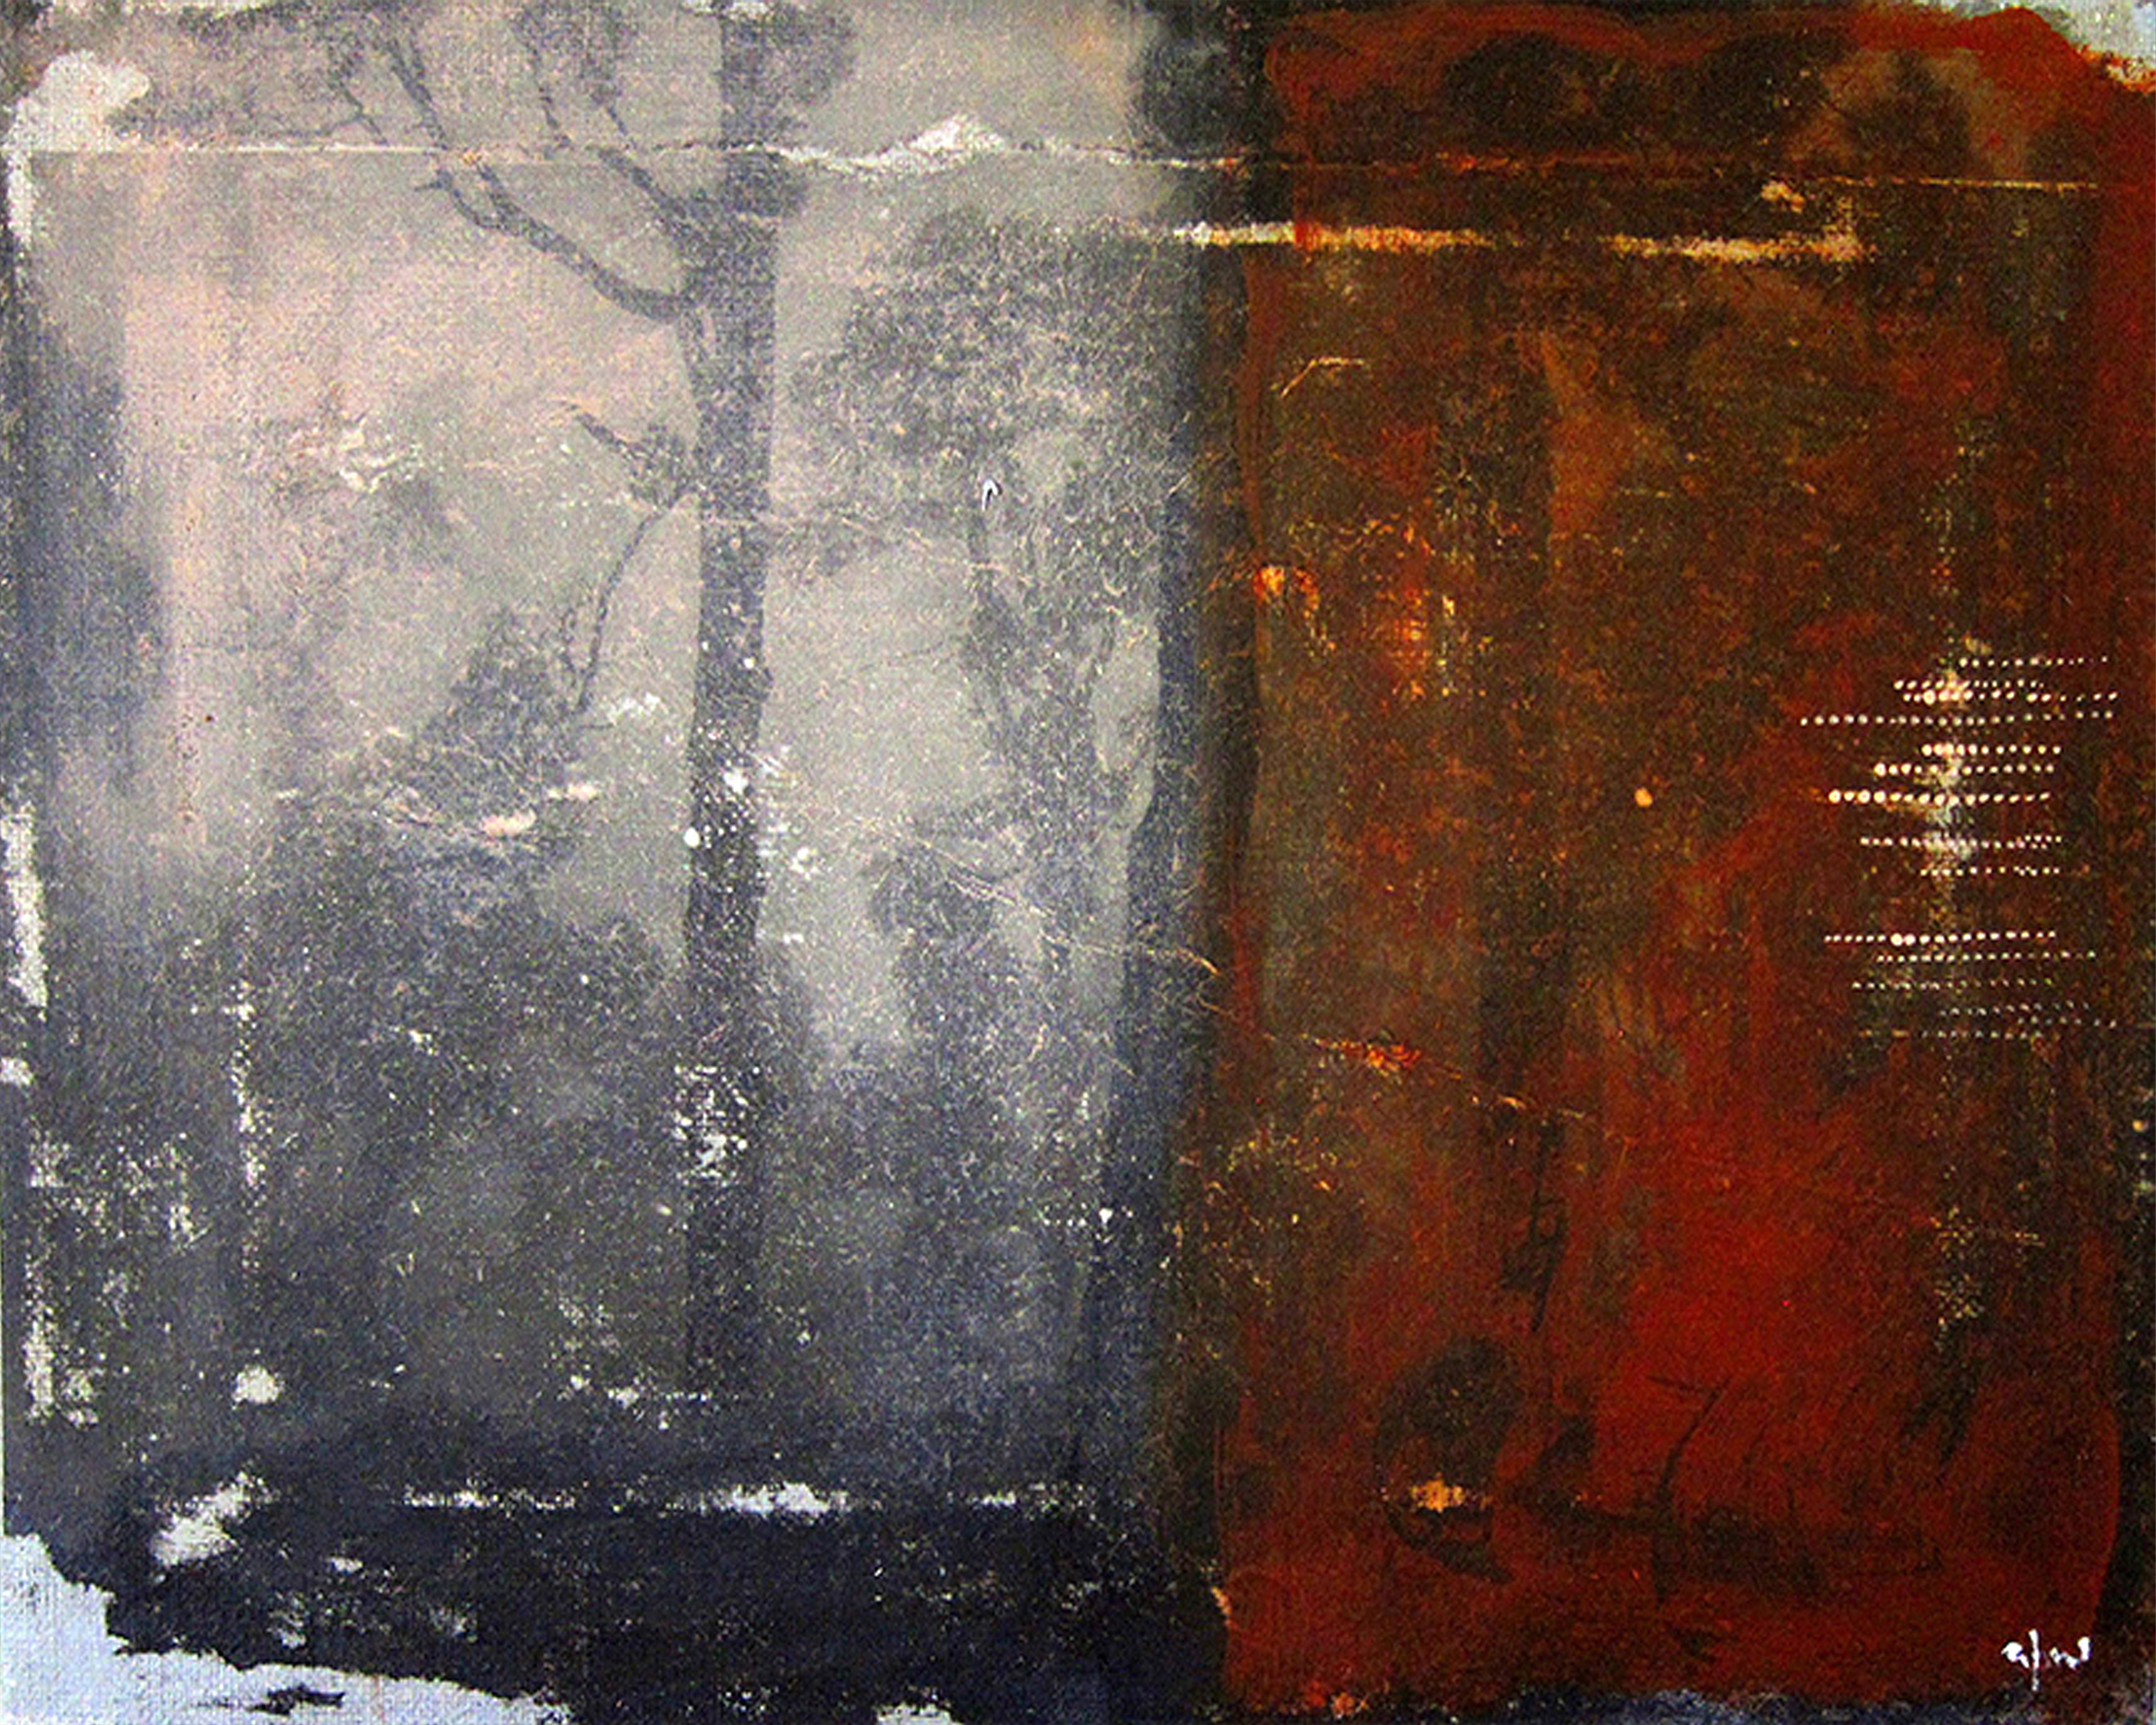  In between #2 Mixed media on canvas 60 x 81 cm 